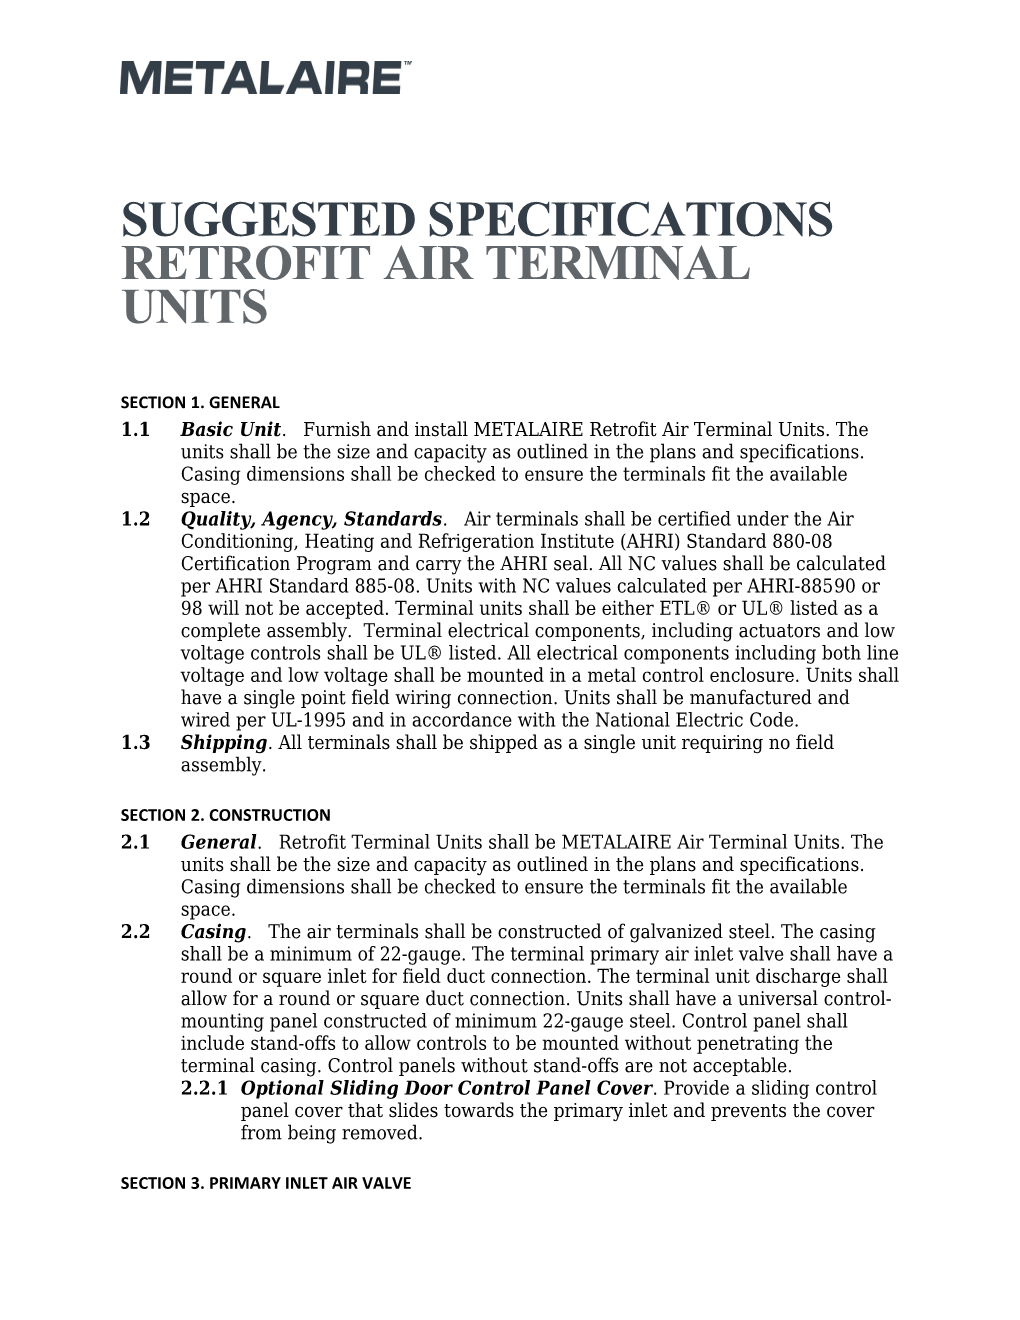 Suggested Specifications Retrofit Air Terminal Units